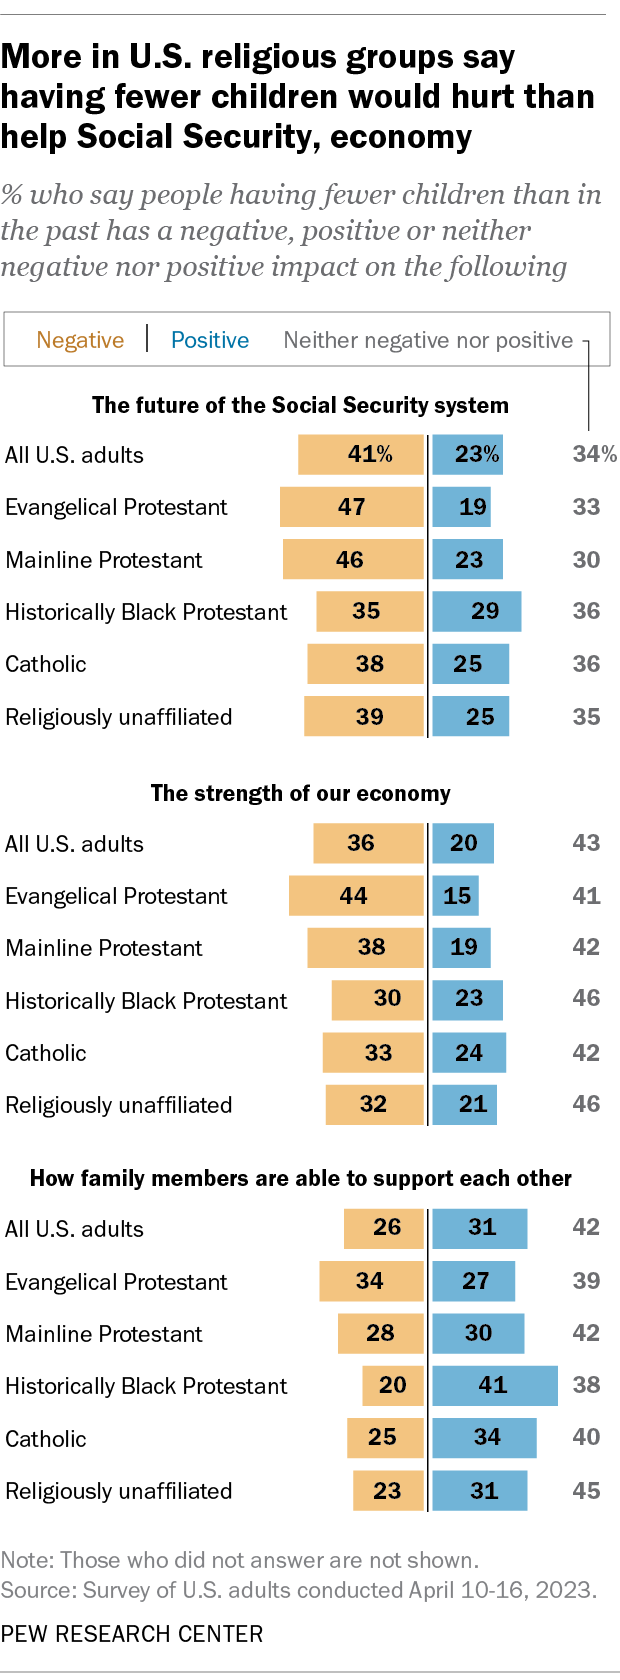 A bar chart showing that more people in U.S. religious groups say having fewer children would hurt than help Social Security, economy.